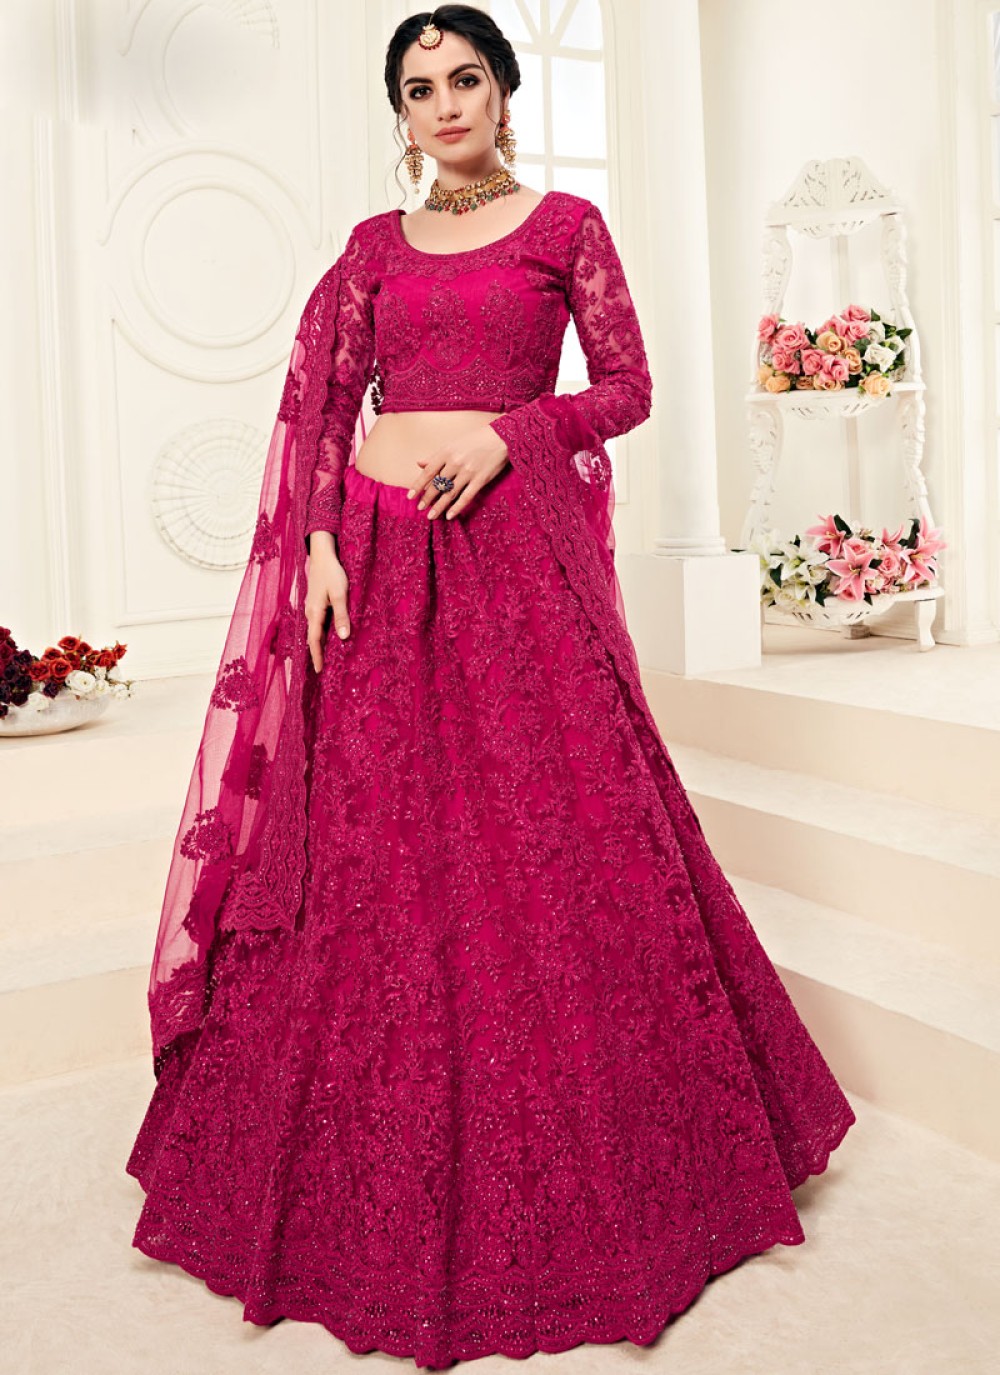 Discover more than 157 pink lehenga designs best